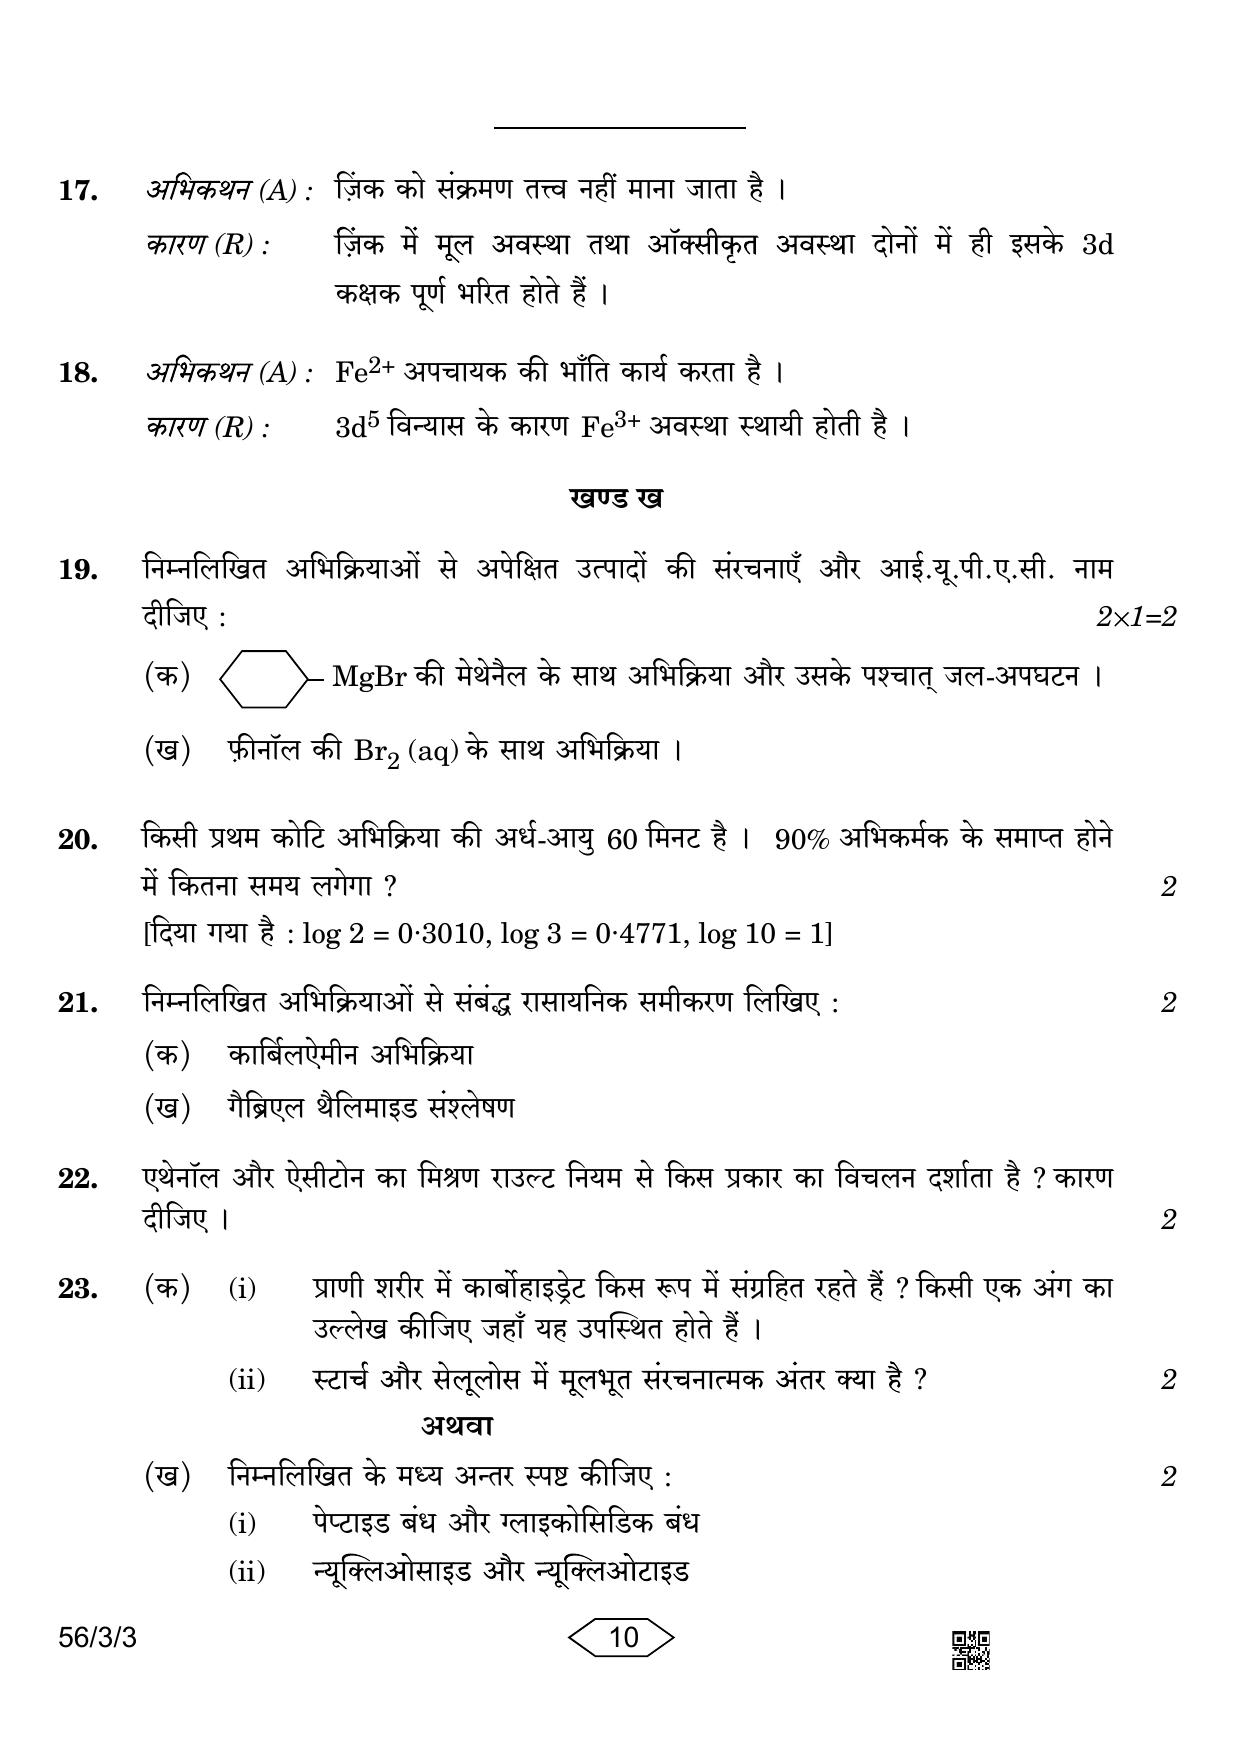 CBSE Class 12 56-3-3 Chemistry 2023 Question Paper - Page 10